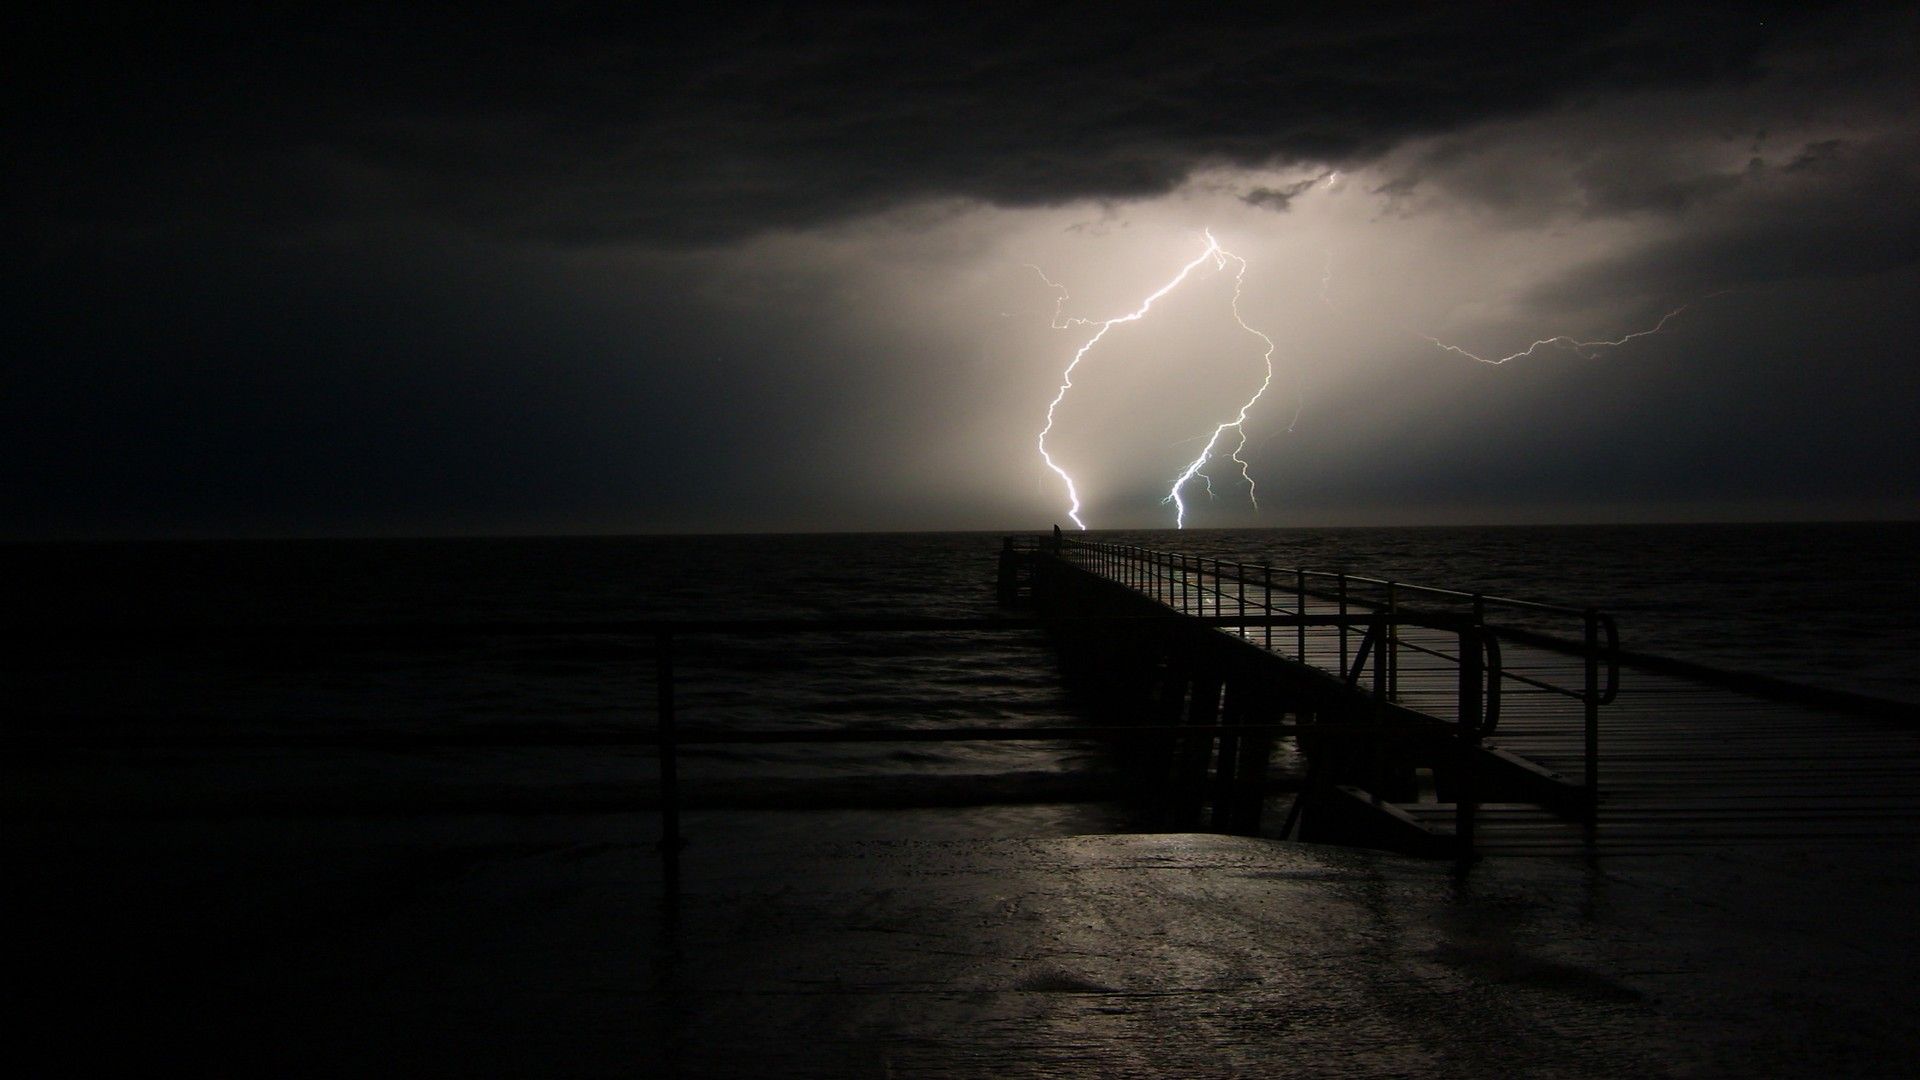 A lightning bolt strikes the water near some piers - Lightning